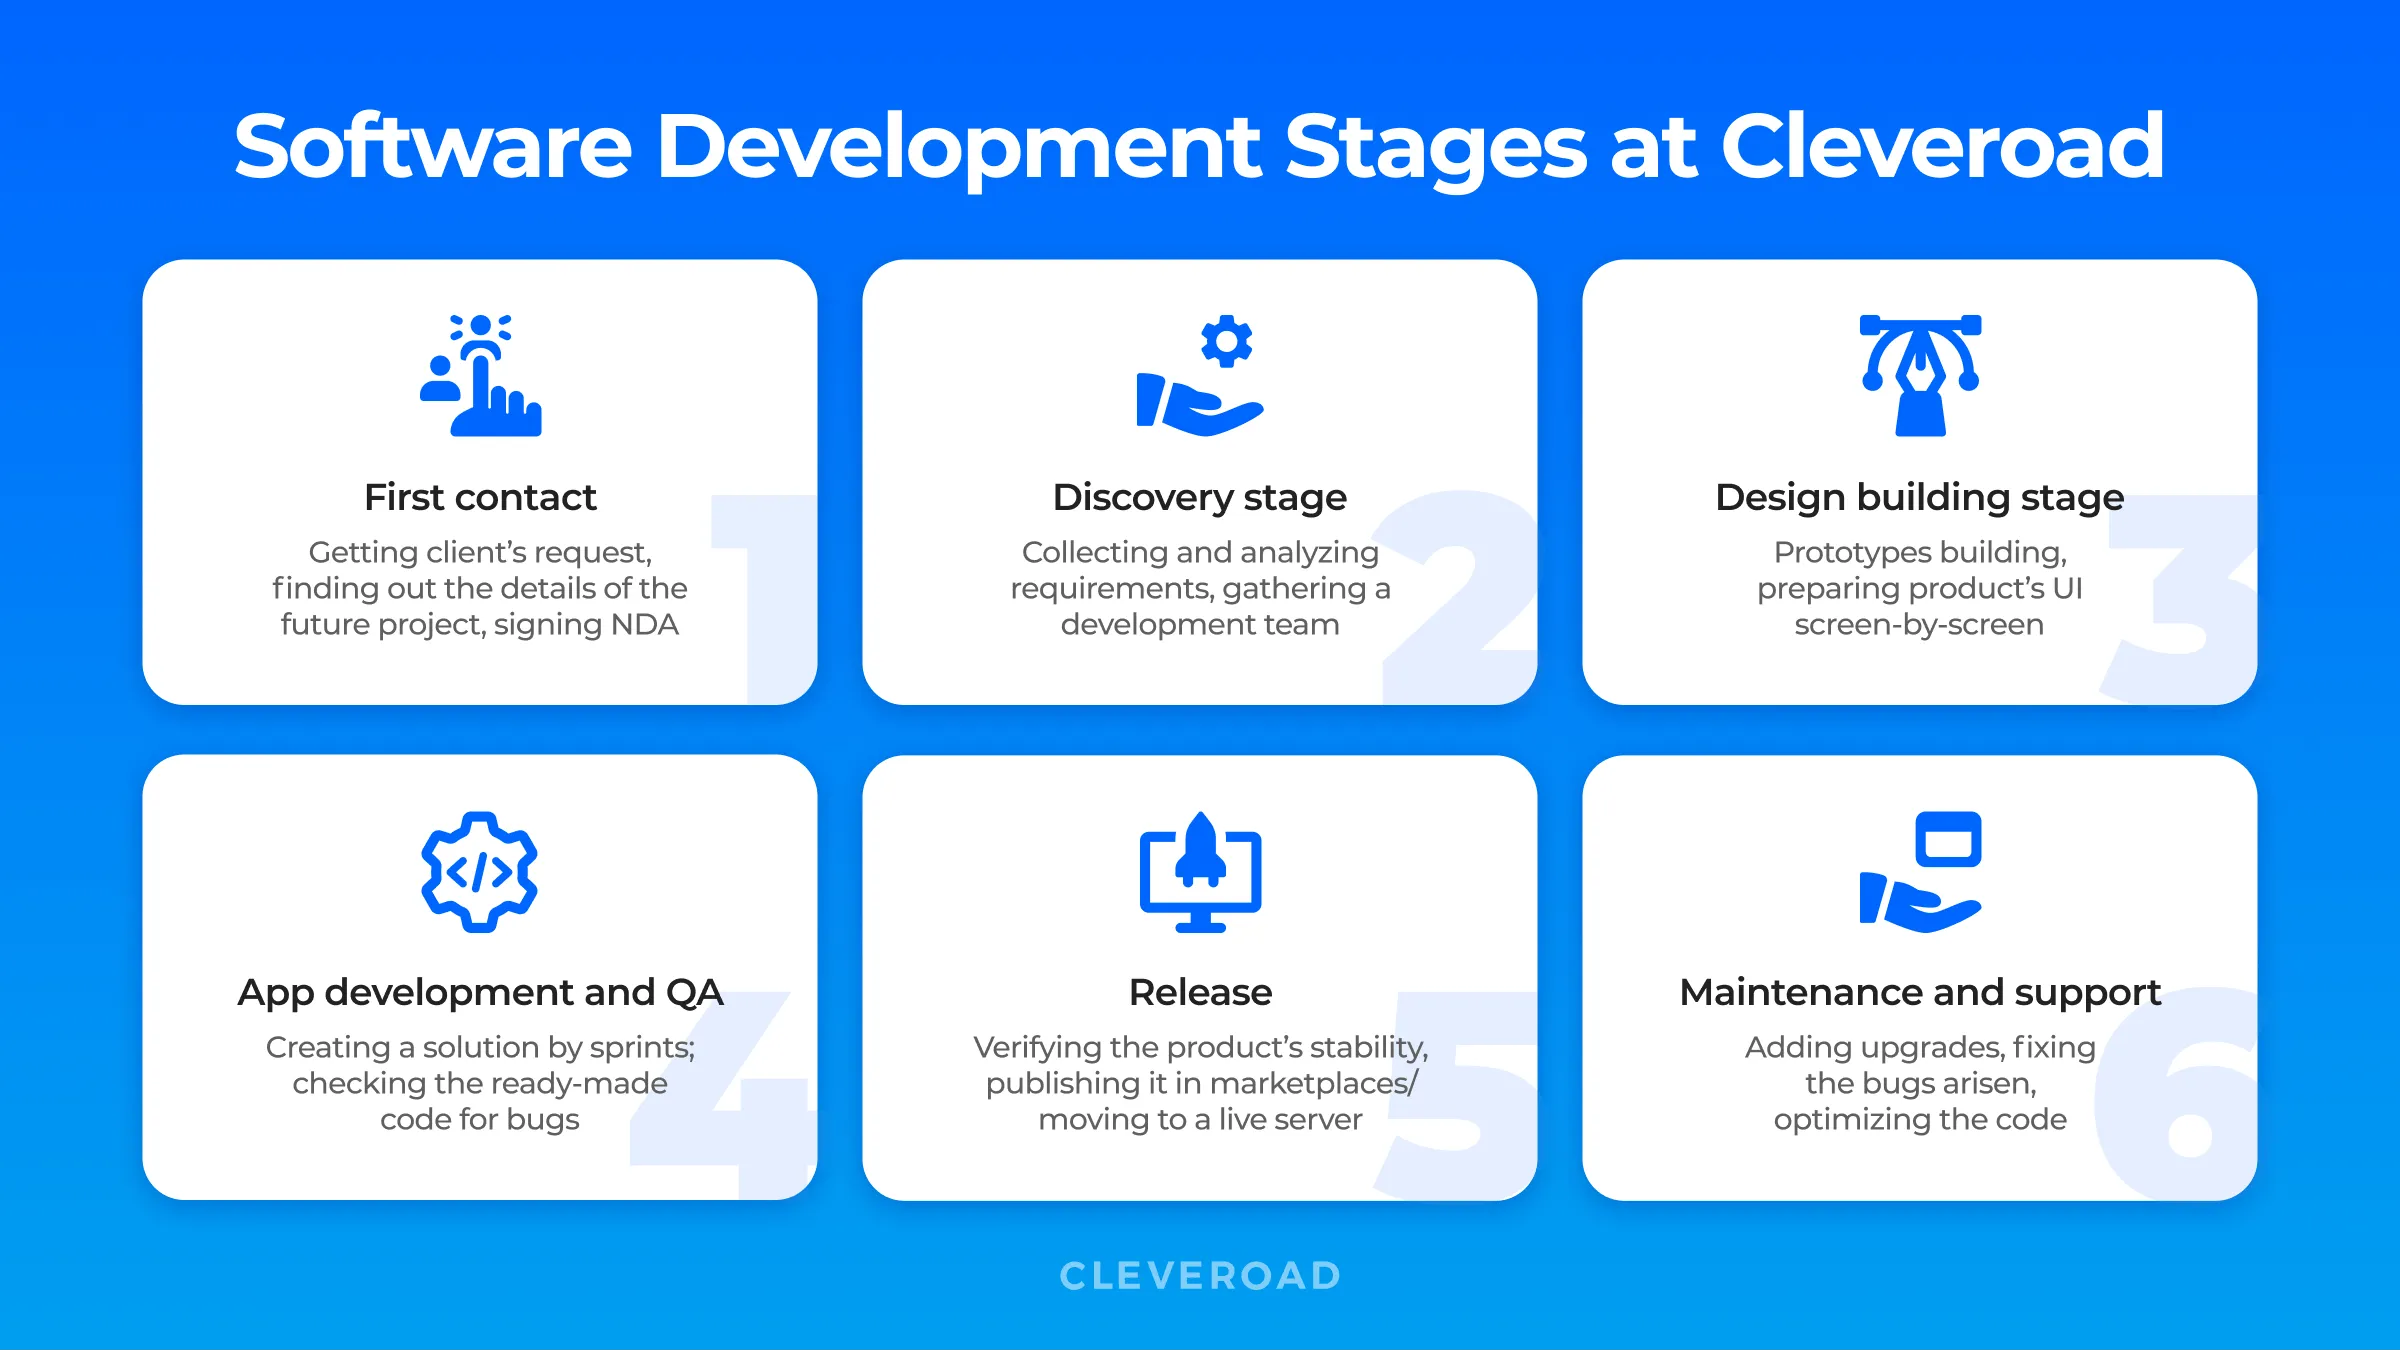 Software development stages at Cleveroad